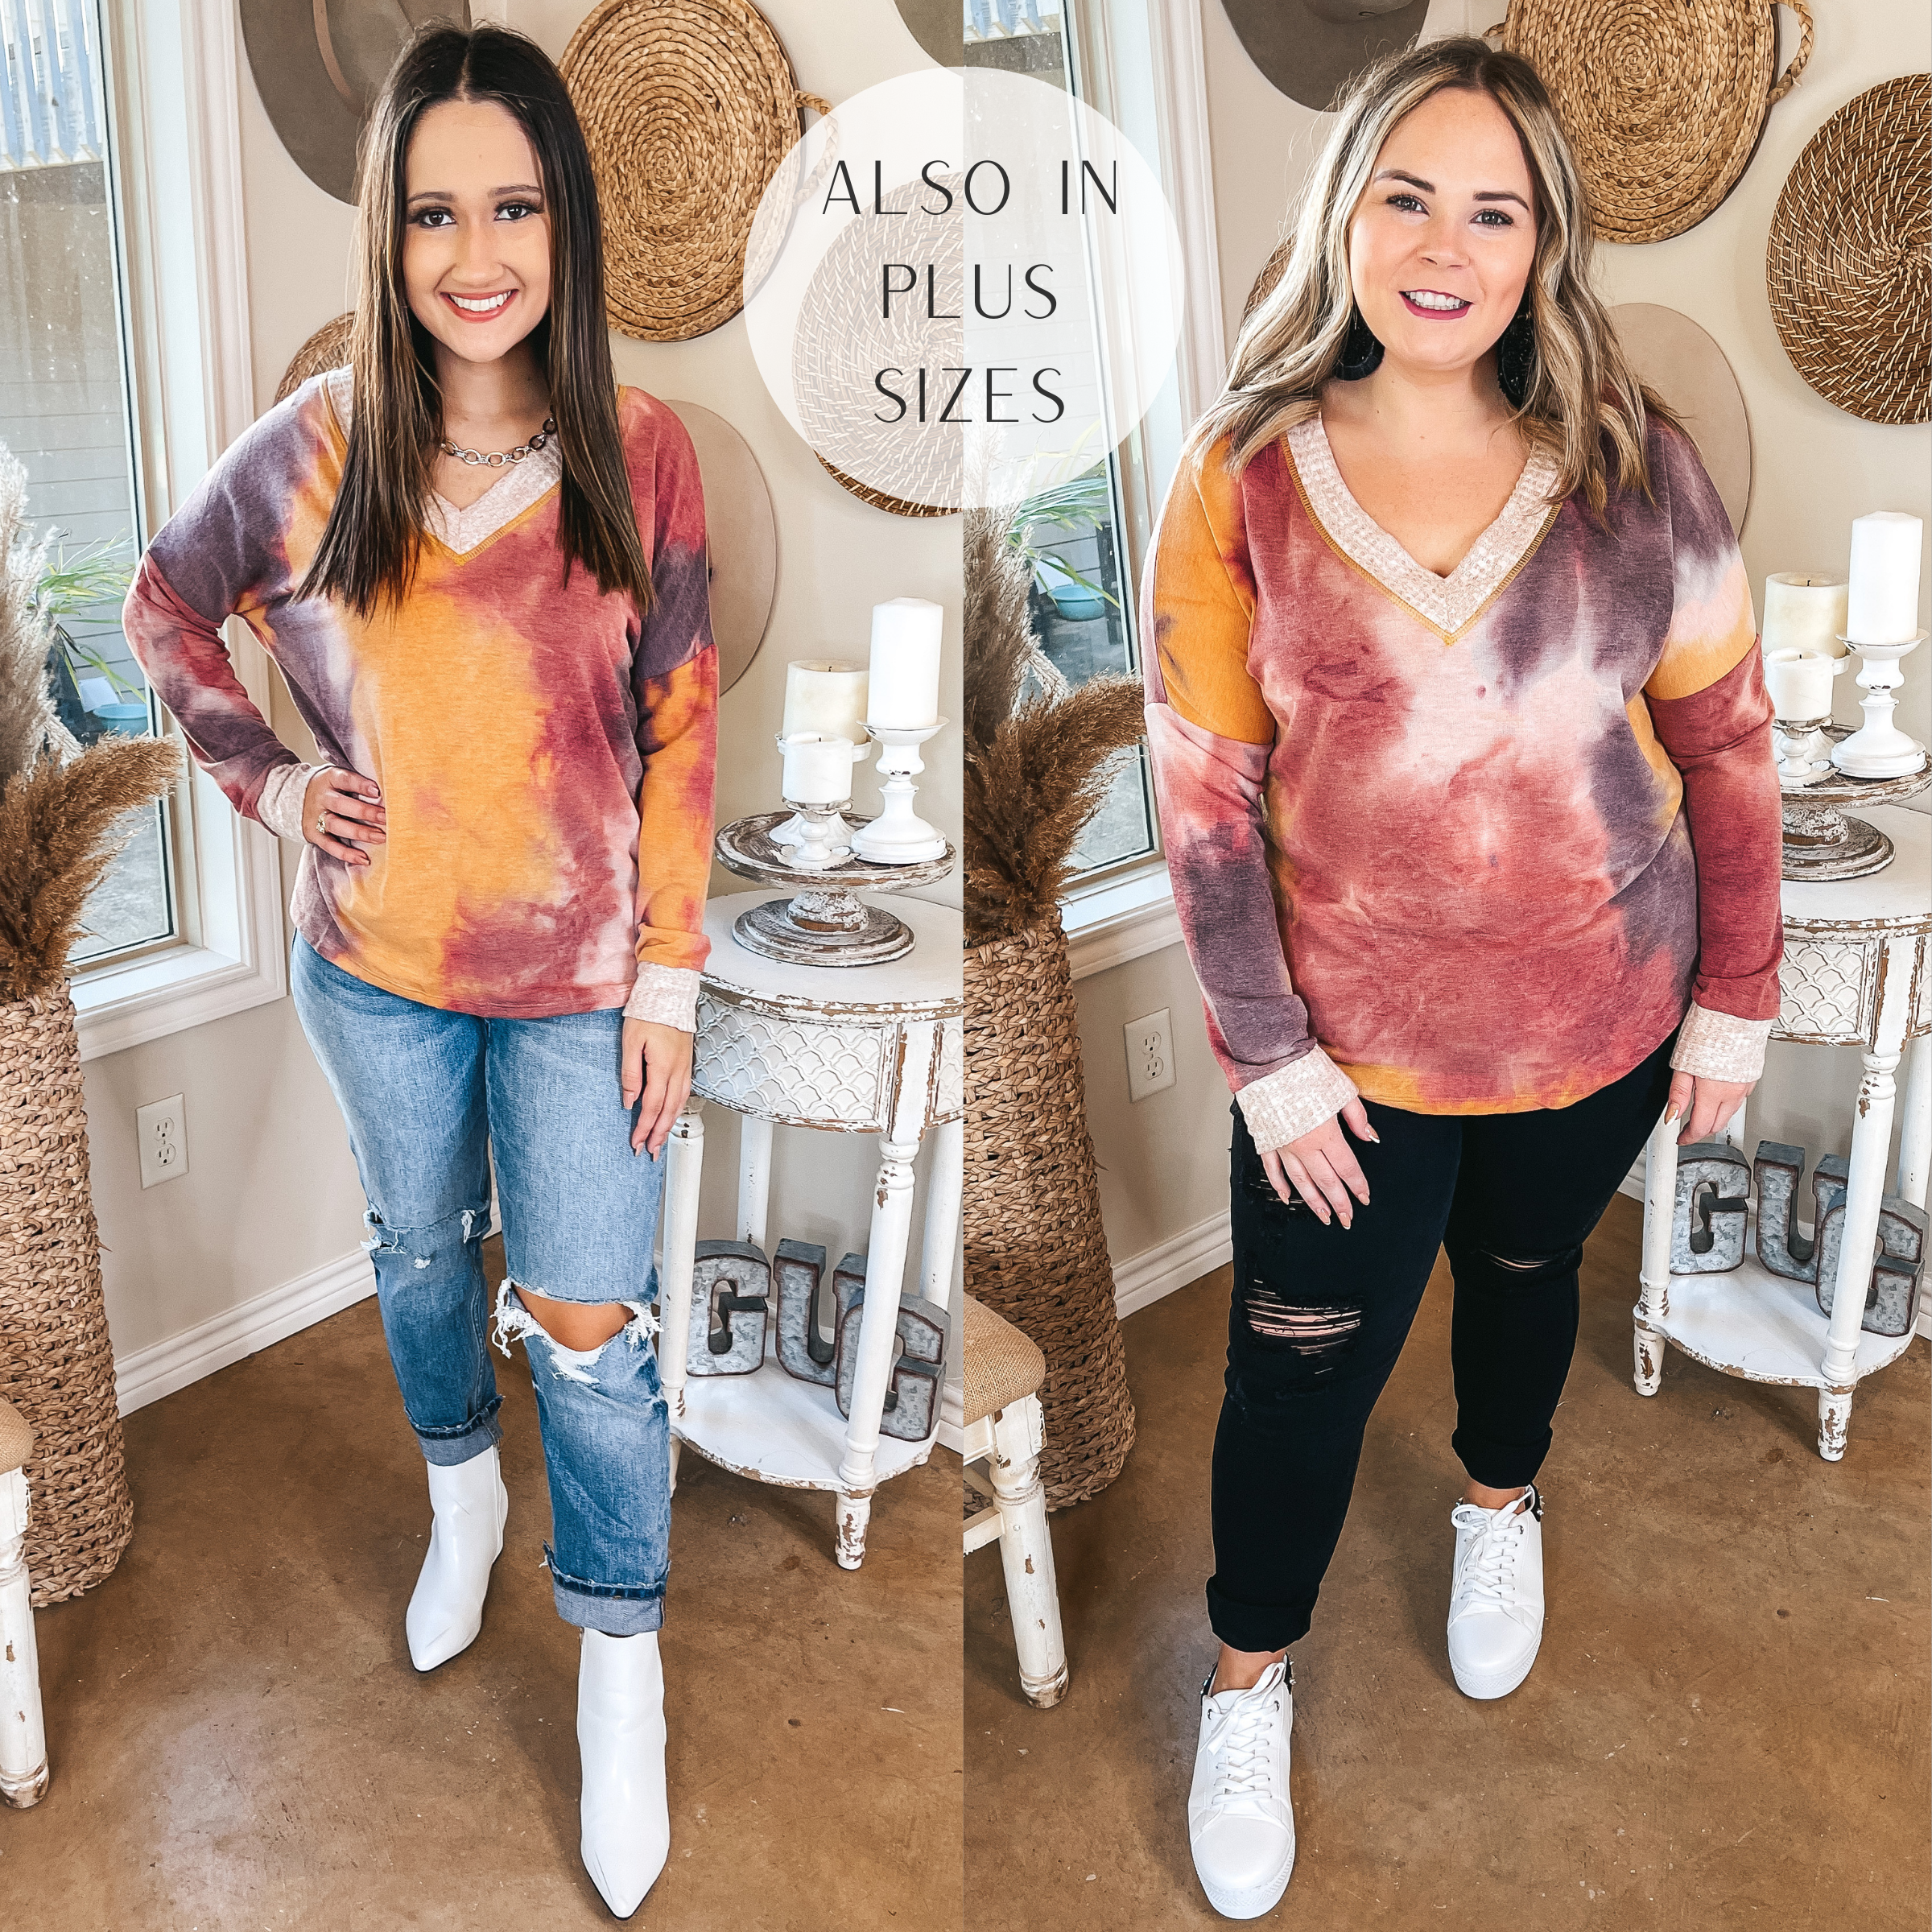 Models are wearinh tie dye long sleeve v neck tops with waffle knit trim. Regular size model has top paired with boyfriend jeans and white booties. Plus size model has it paired with black jeans and white sneakers.